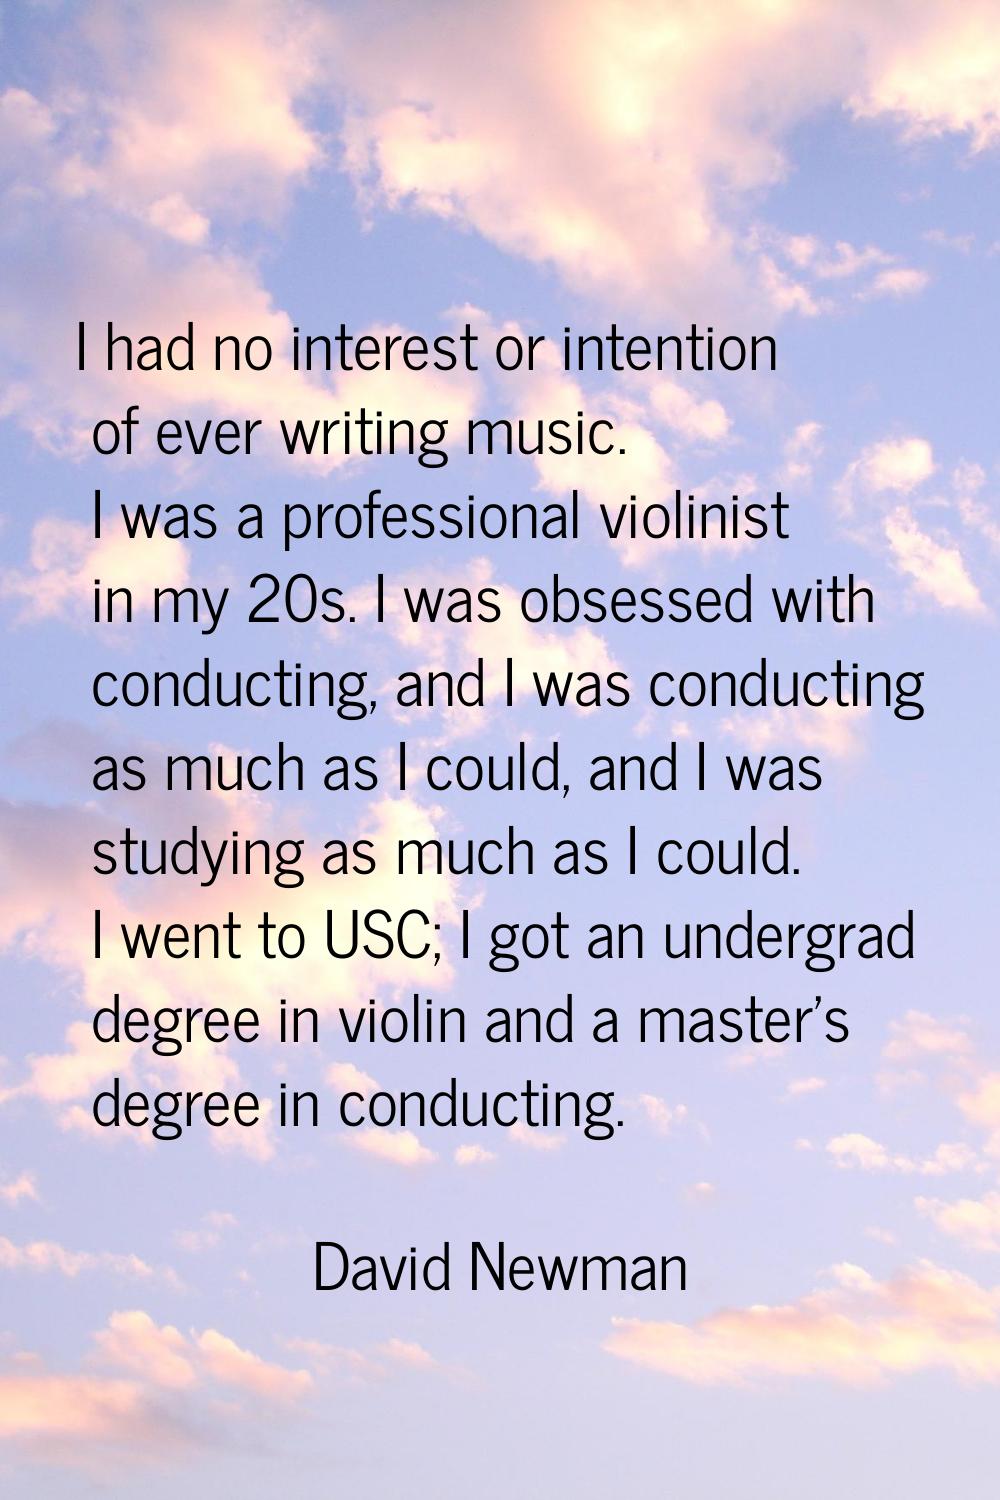 I had no interest or intention of ever writing music. I was a professional violinist in my 20s. I w